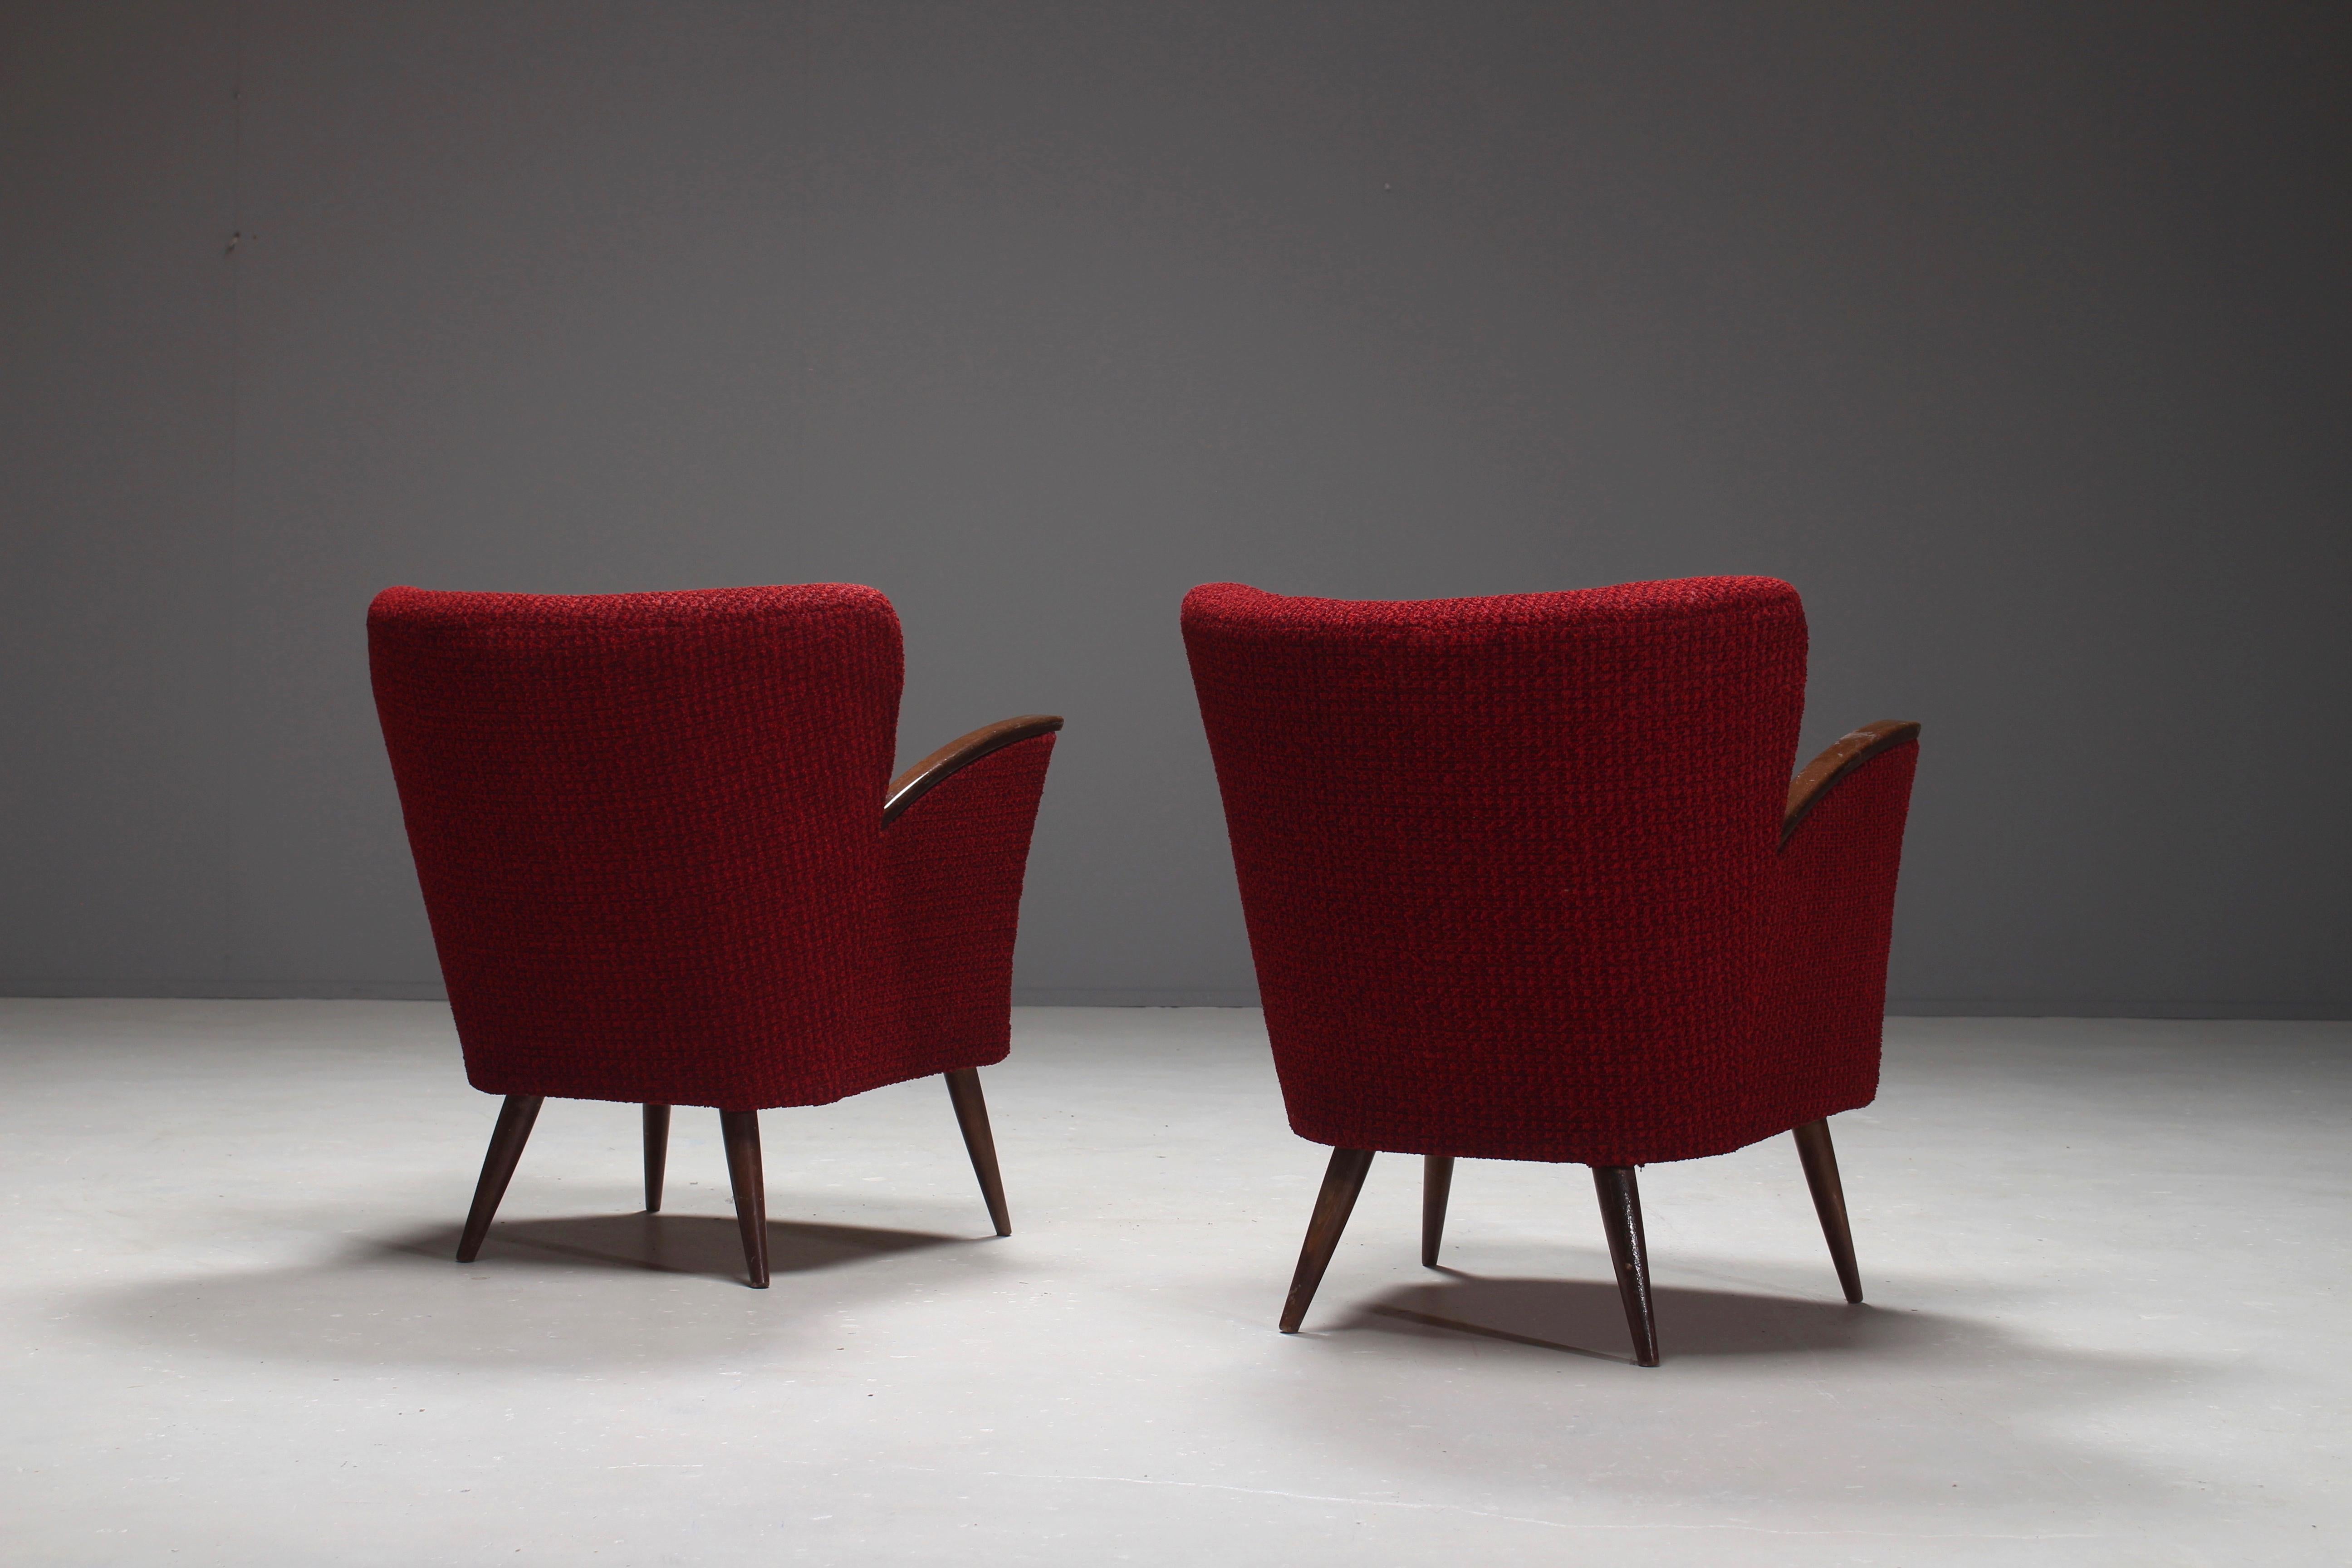 Pair of Italian Gio Ponti Style Club Chairs in Red Wool Fabric, 1950s For Sale 4